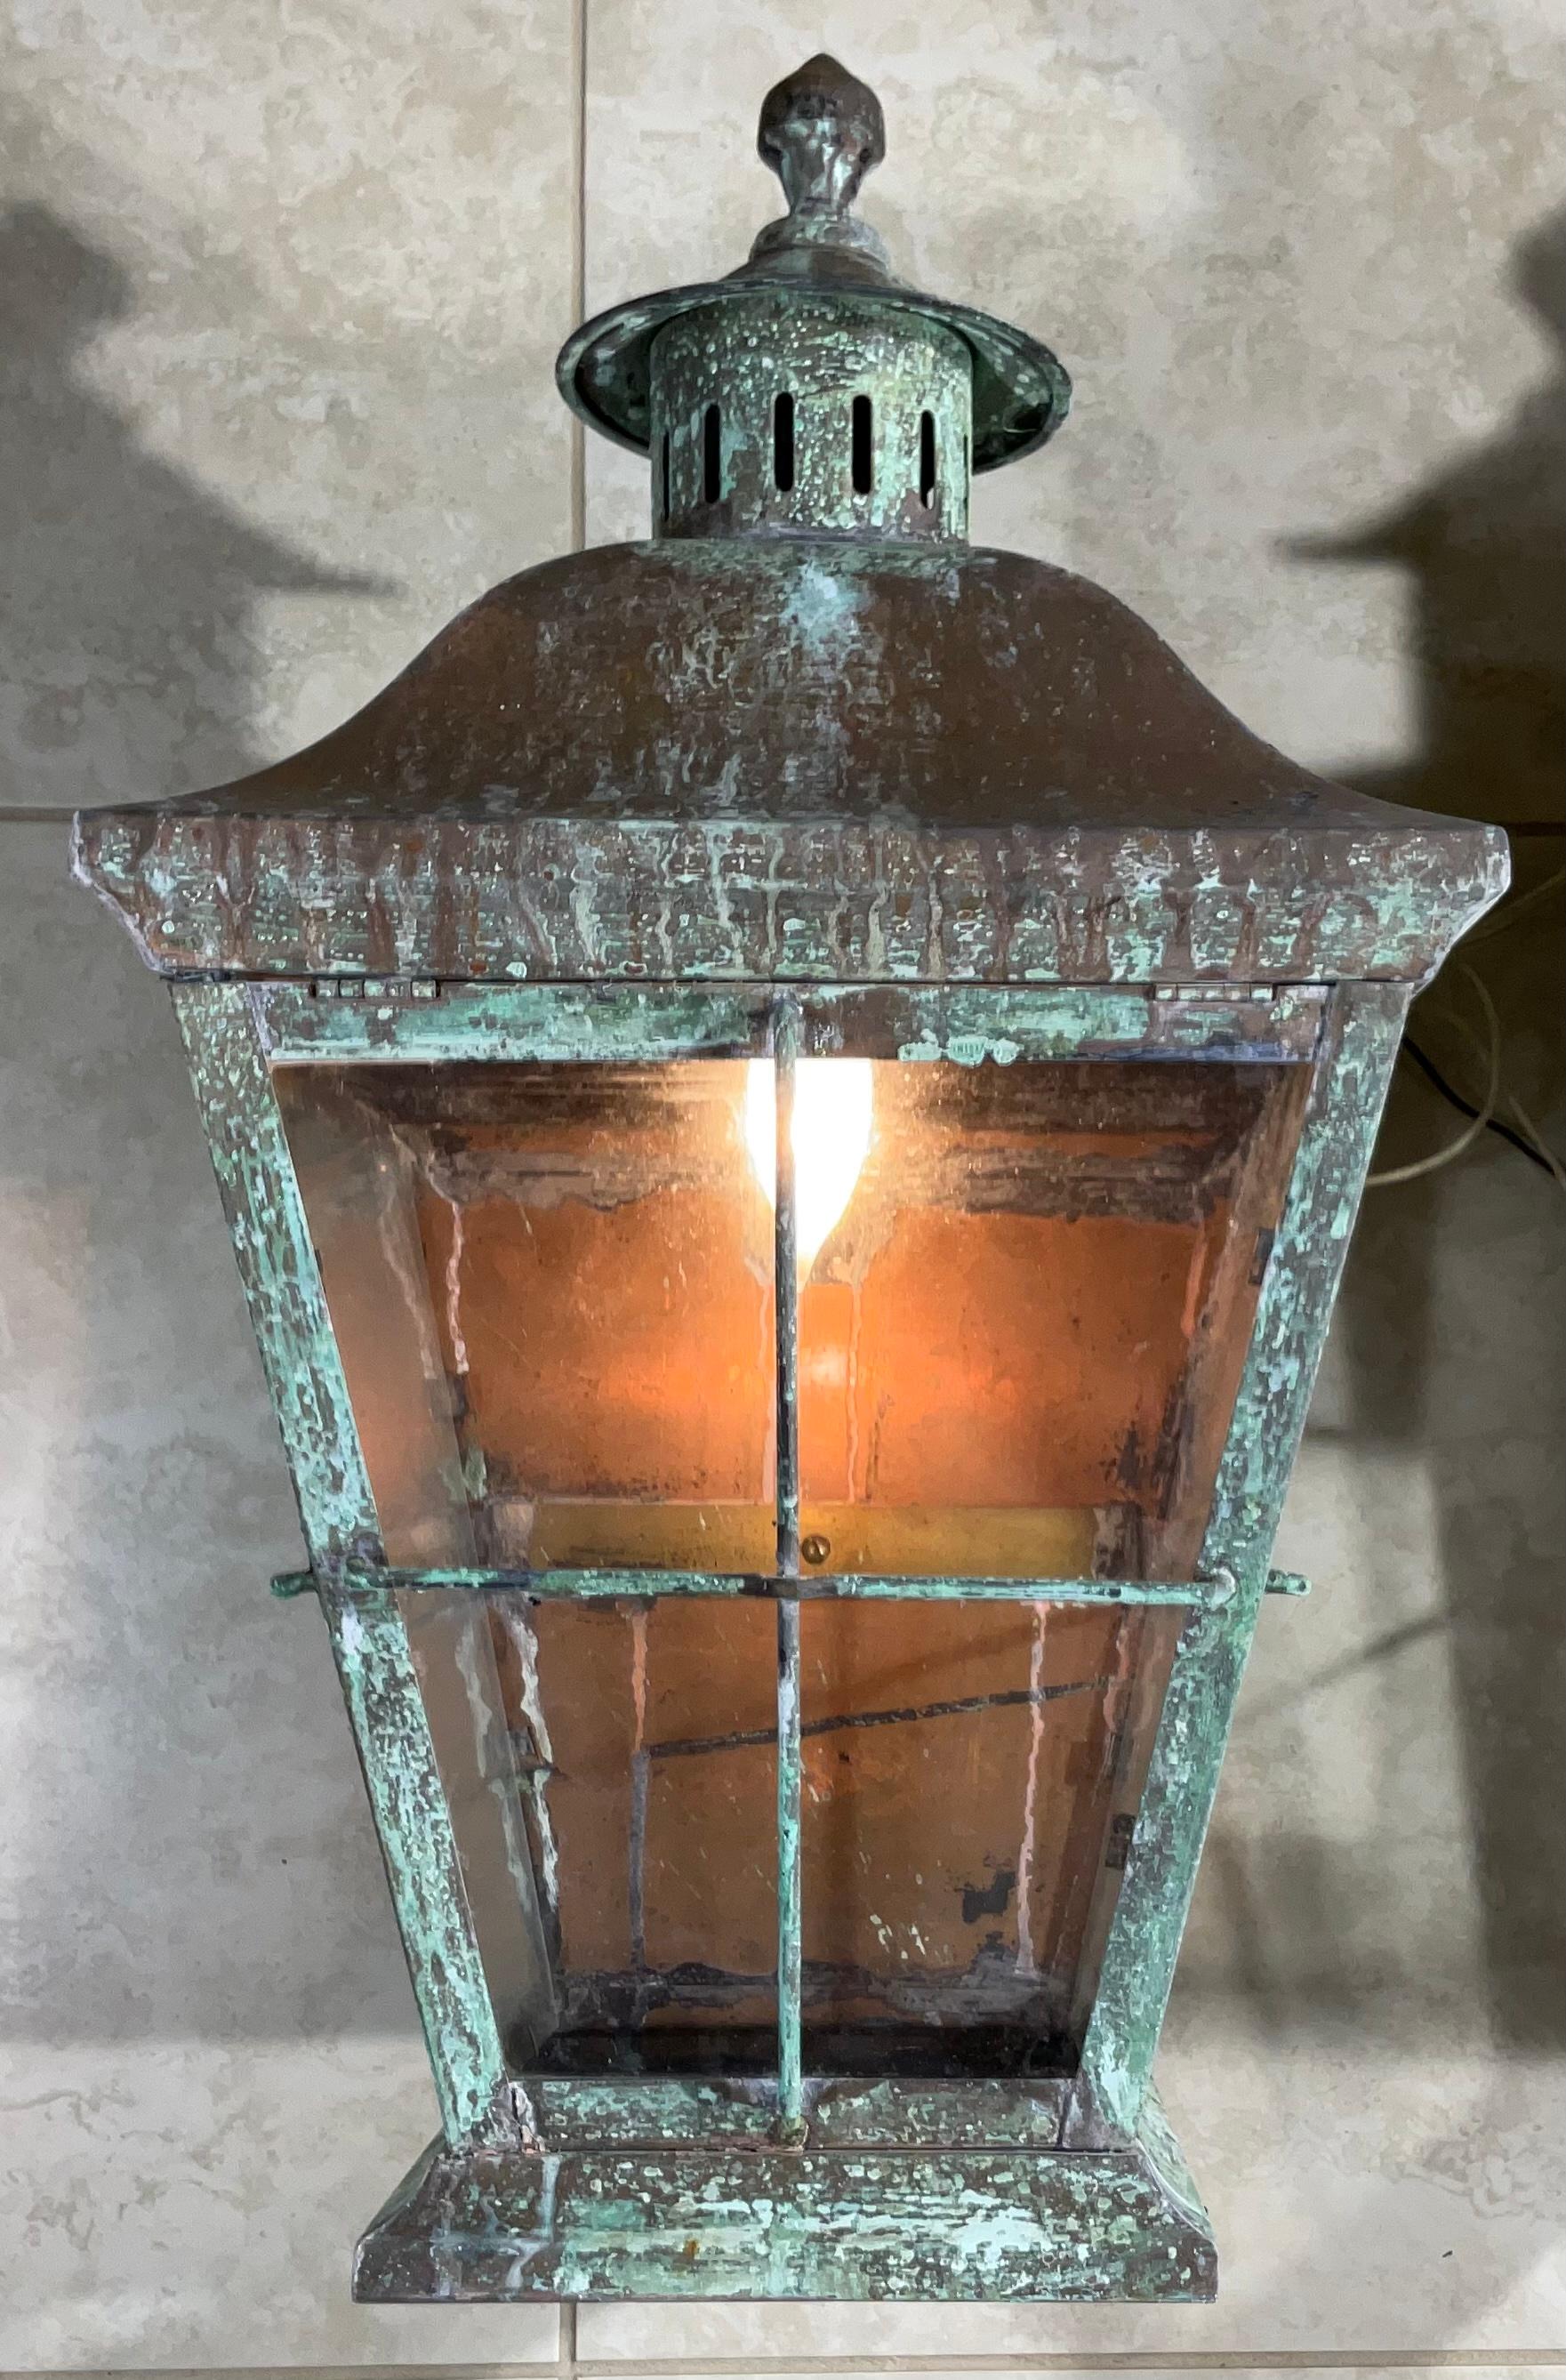 Impressive large pair of wall lantern made of solid copper and brass, quality workmanship, electrified with one 60/watt lights each, beautiful patina.
Back plate size :11”.5 x4”
Suitable for wet location. 
Decorative pair of lantern for indoor or